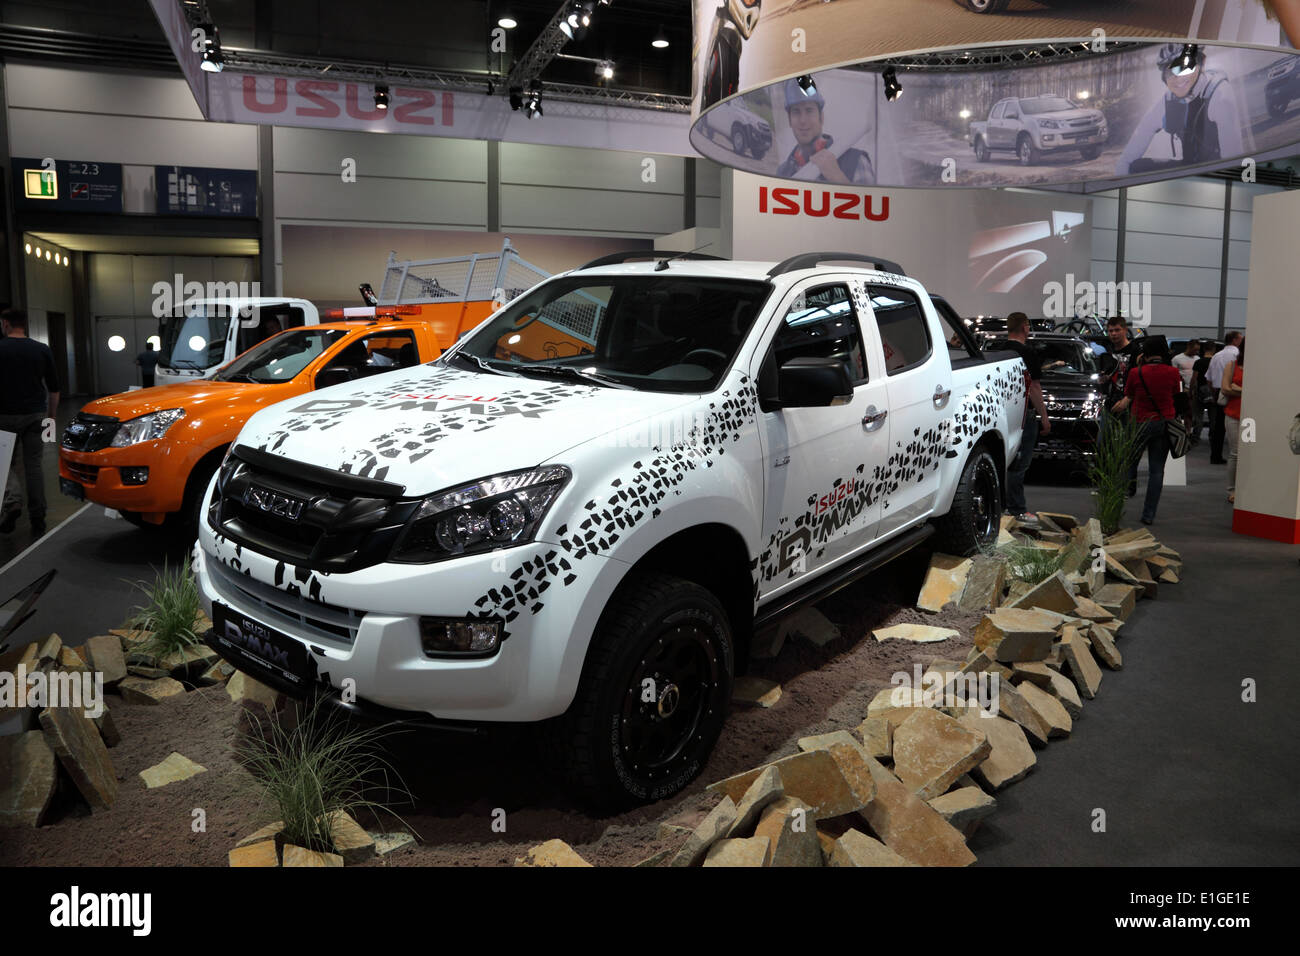 ISUZU D-MAX 4x4 pickup truck at the AMI - Auto Mobile International Trade Fair on June 1st, 2014 in Leipzig, Saxony, Germany Stock Photo